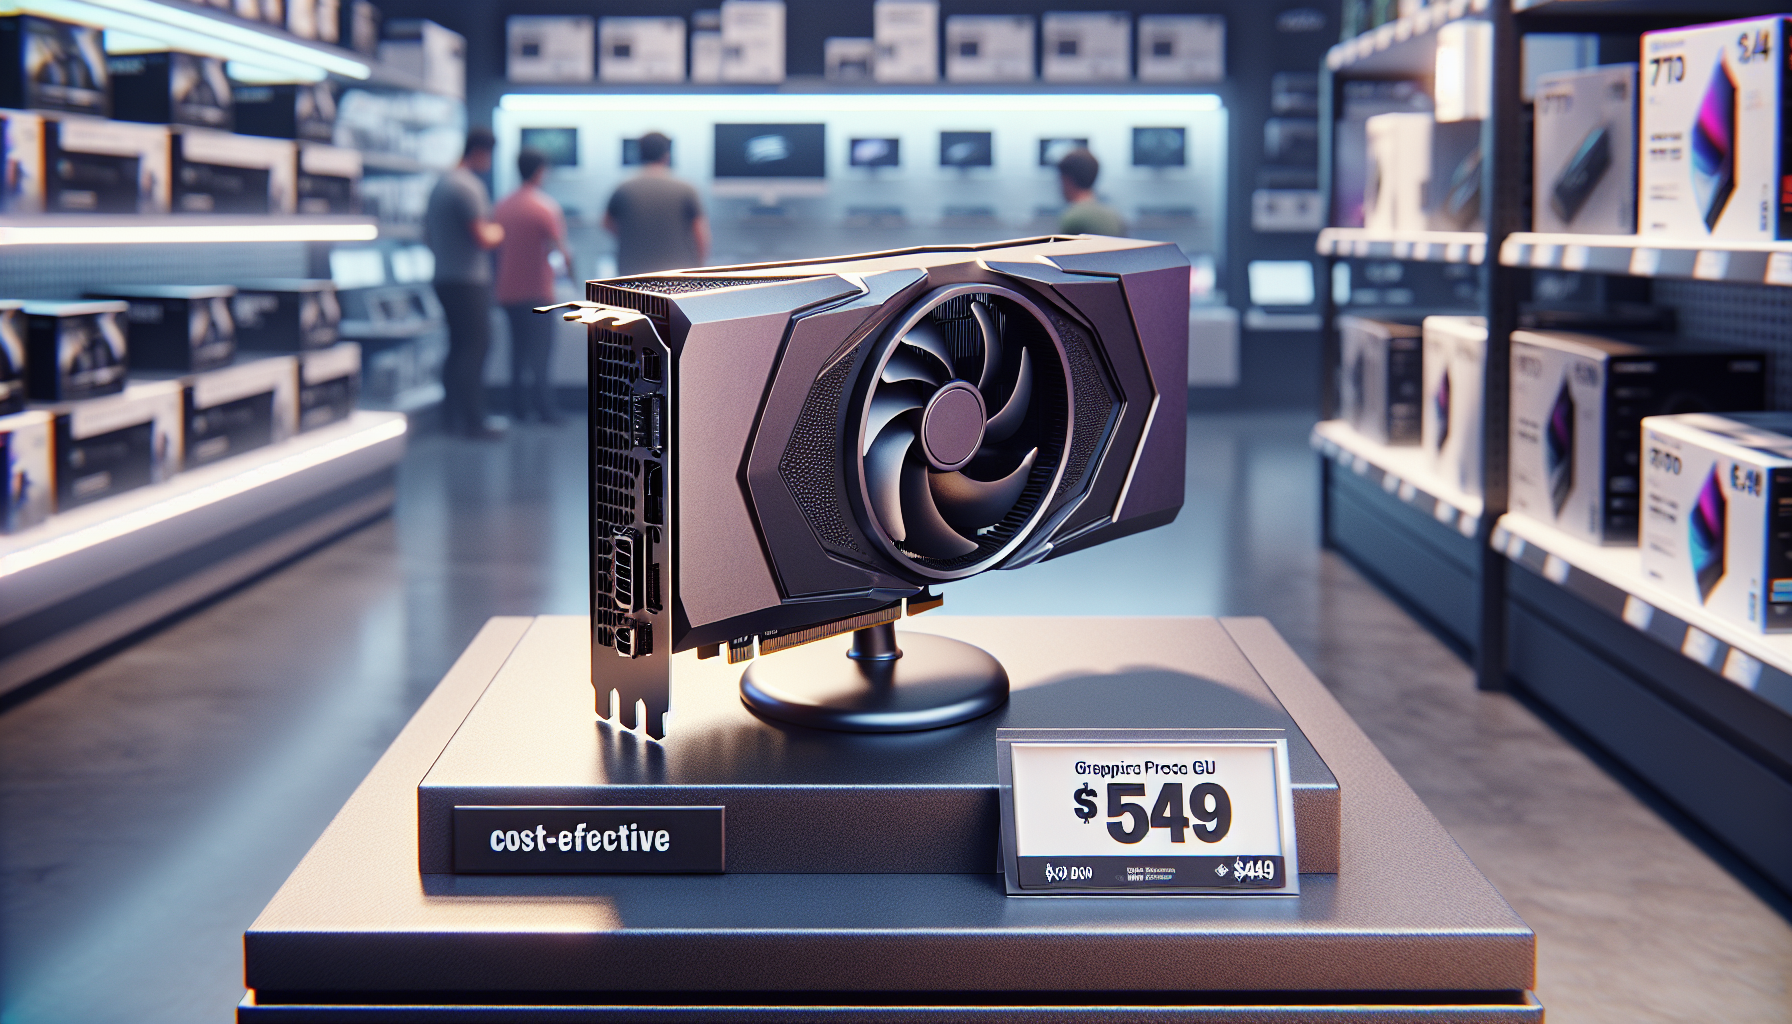 AMD is set to release a cost-effective version of the 7900 XT GPU in the United States, priced at $549.